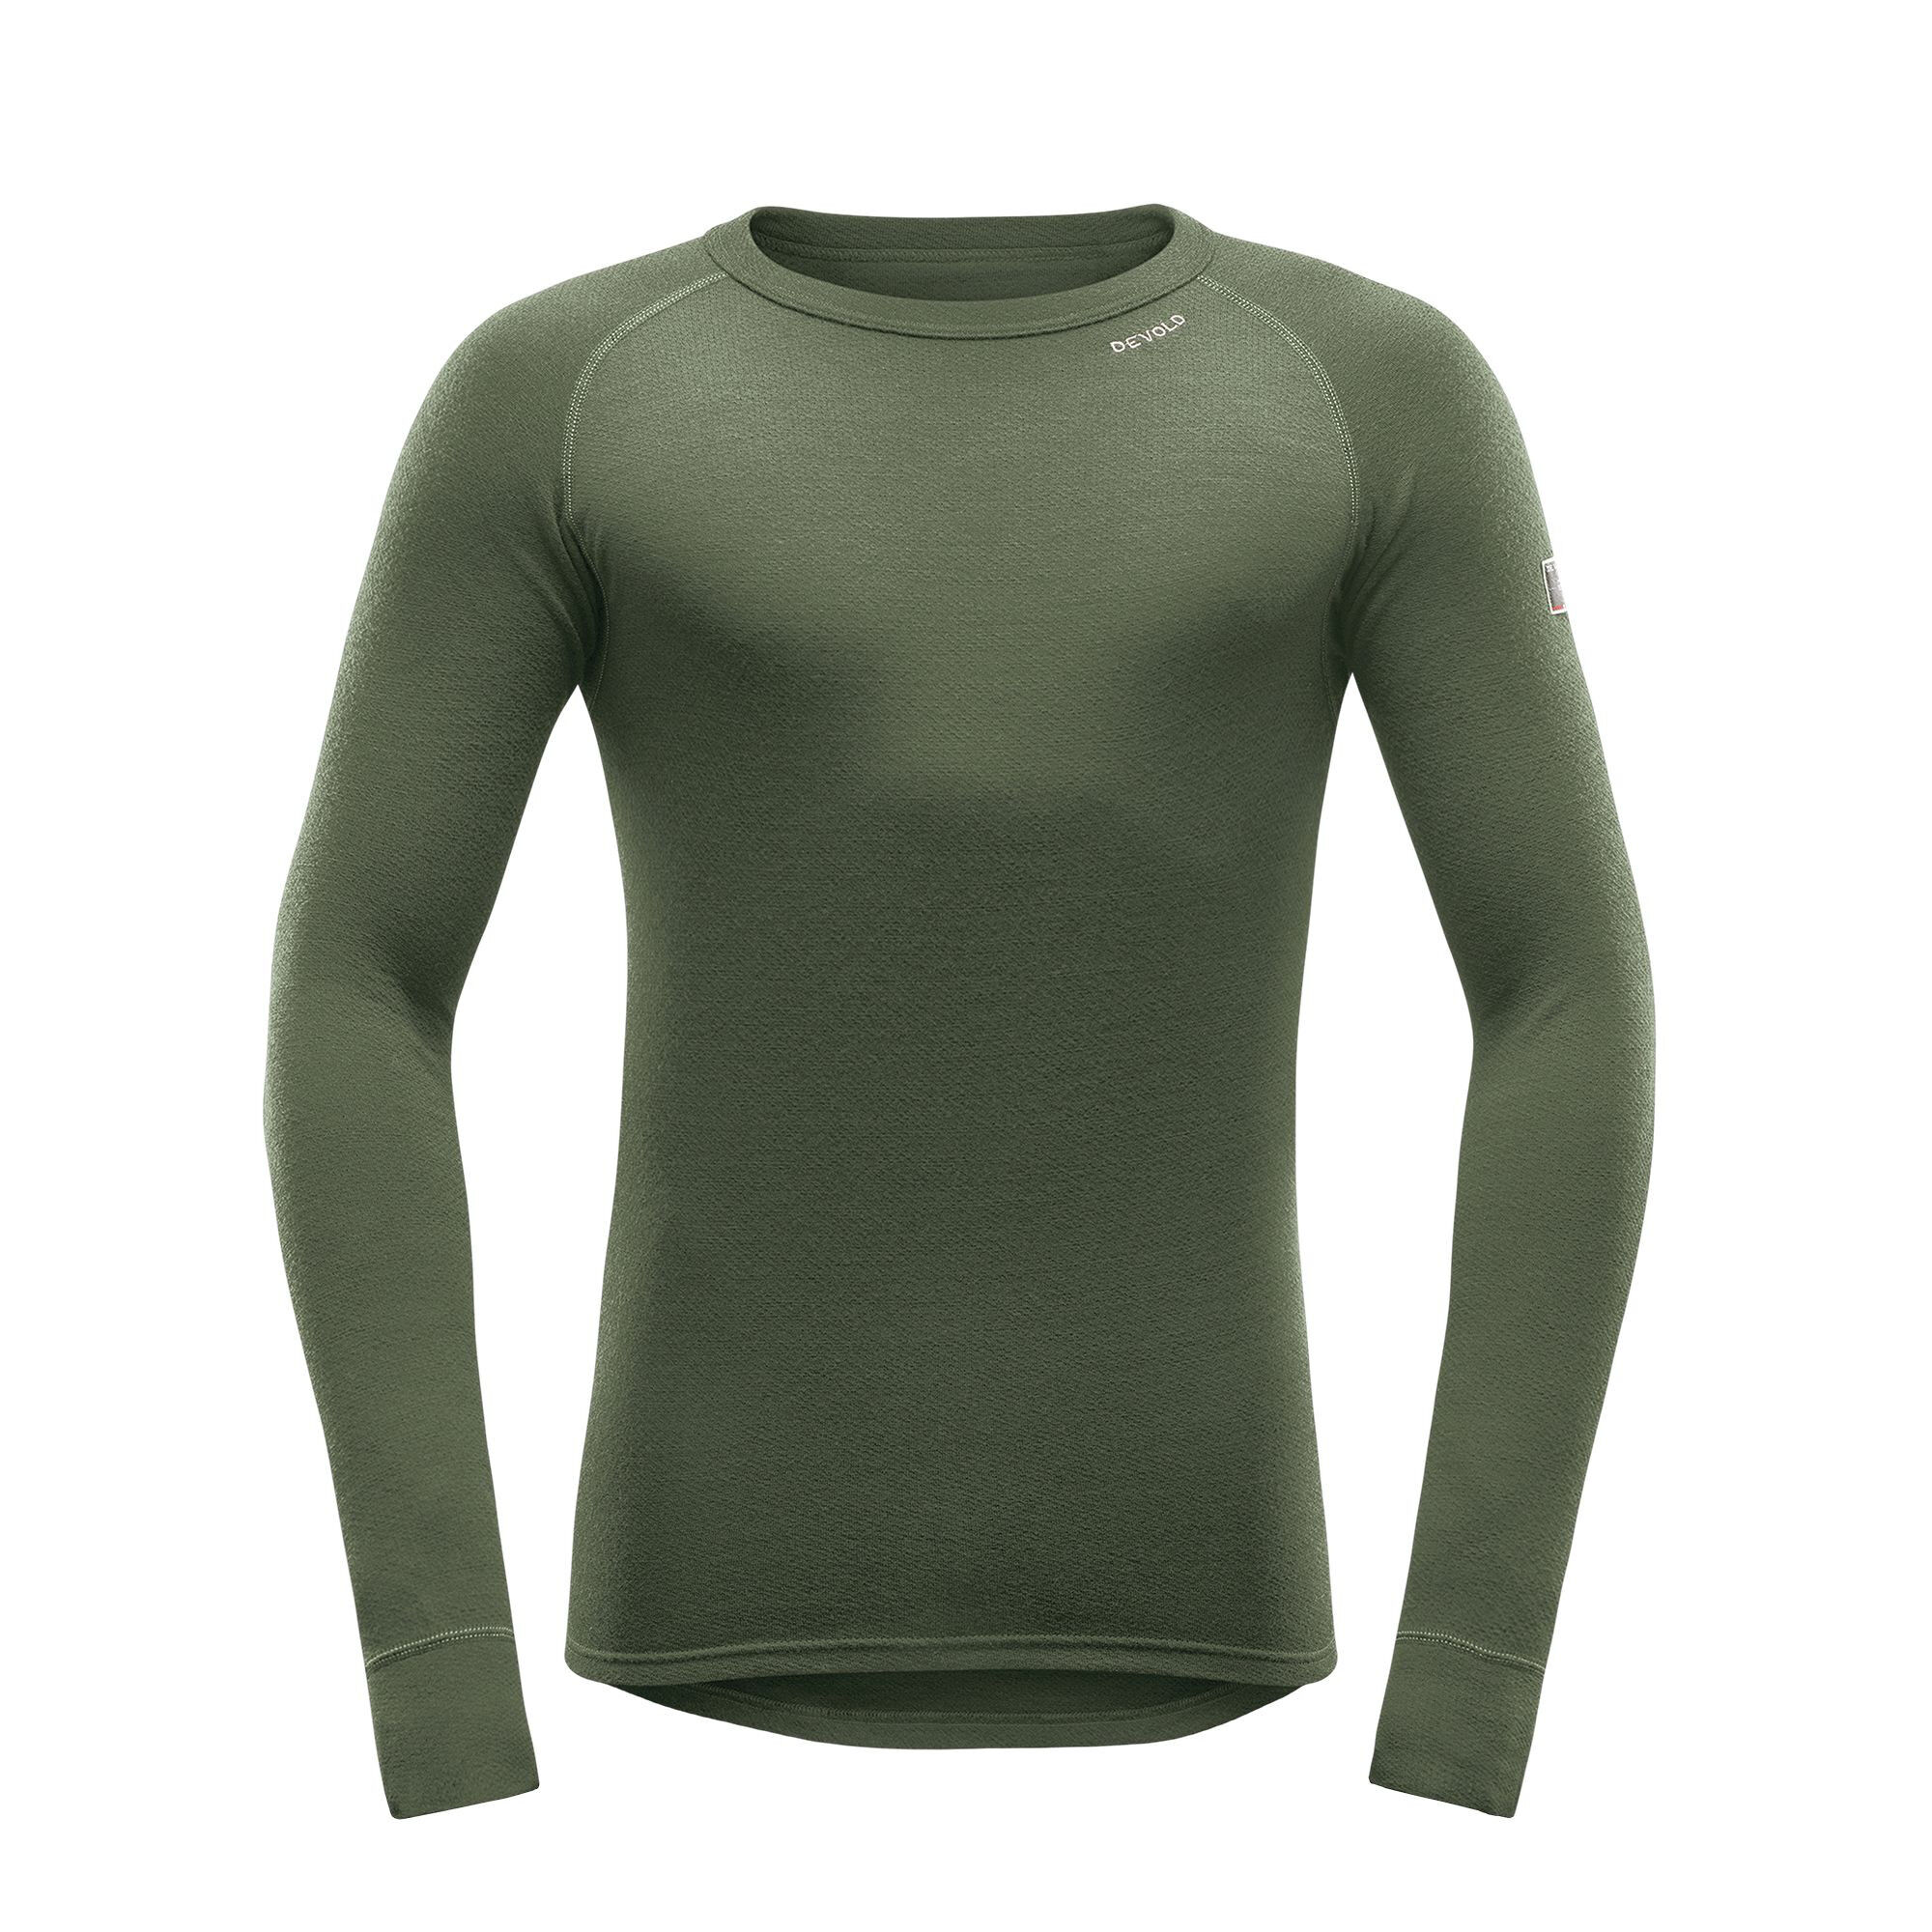 Devold Expedition - Base layer - Men's